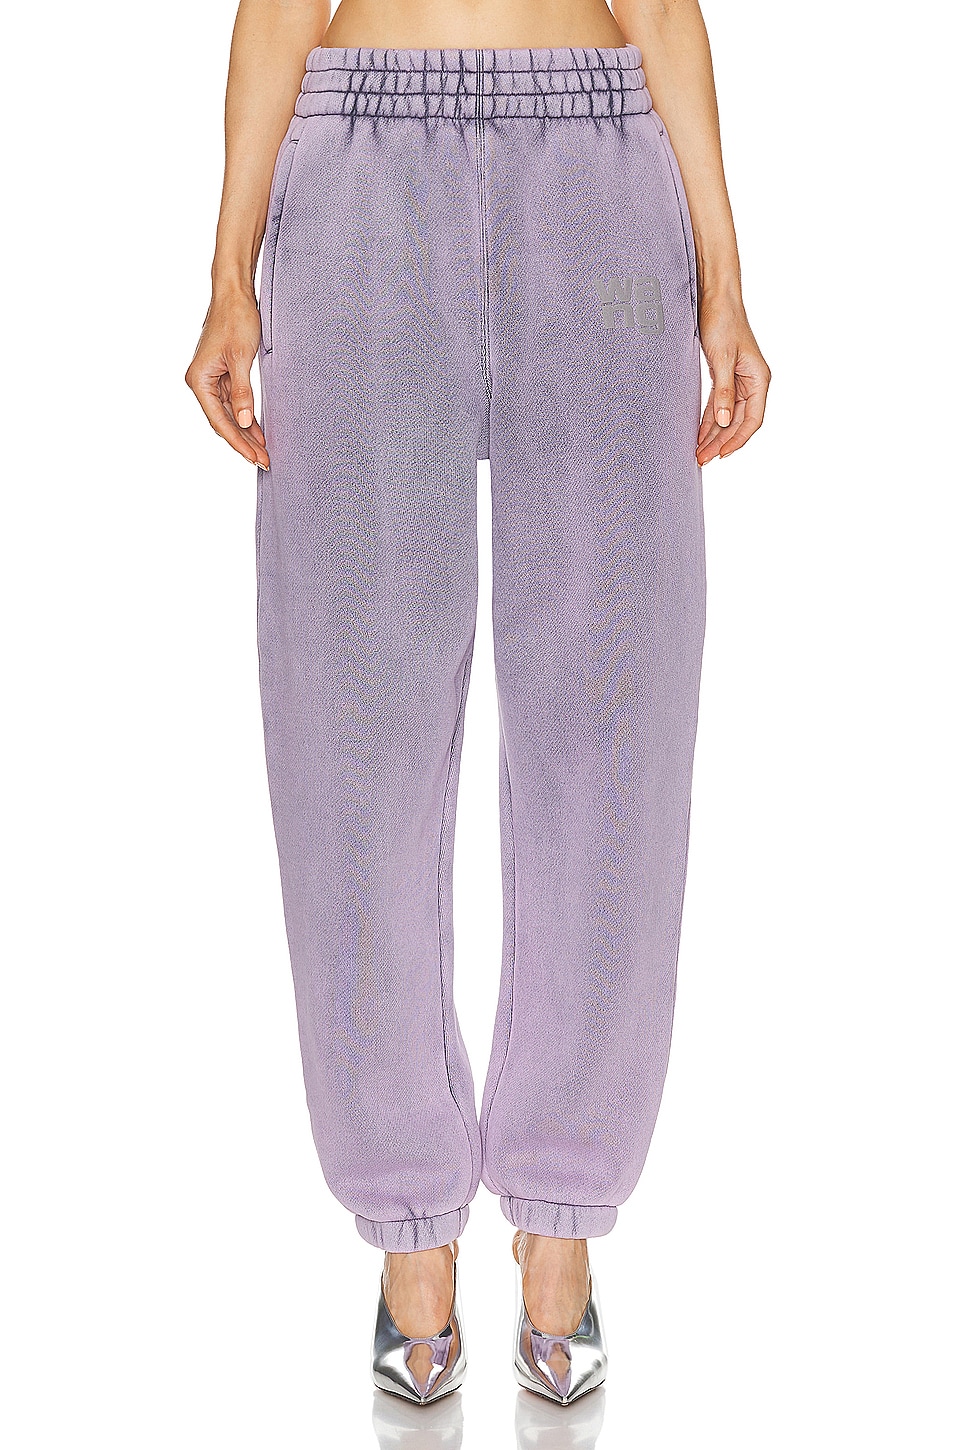 Image 1 of Alexander Wang Essential Classic Terry Sweatpant in Acid Pink Lavender